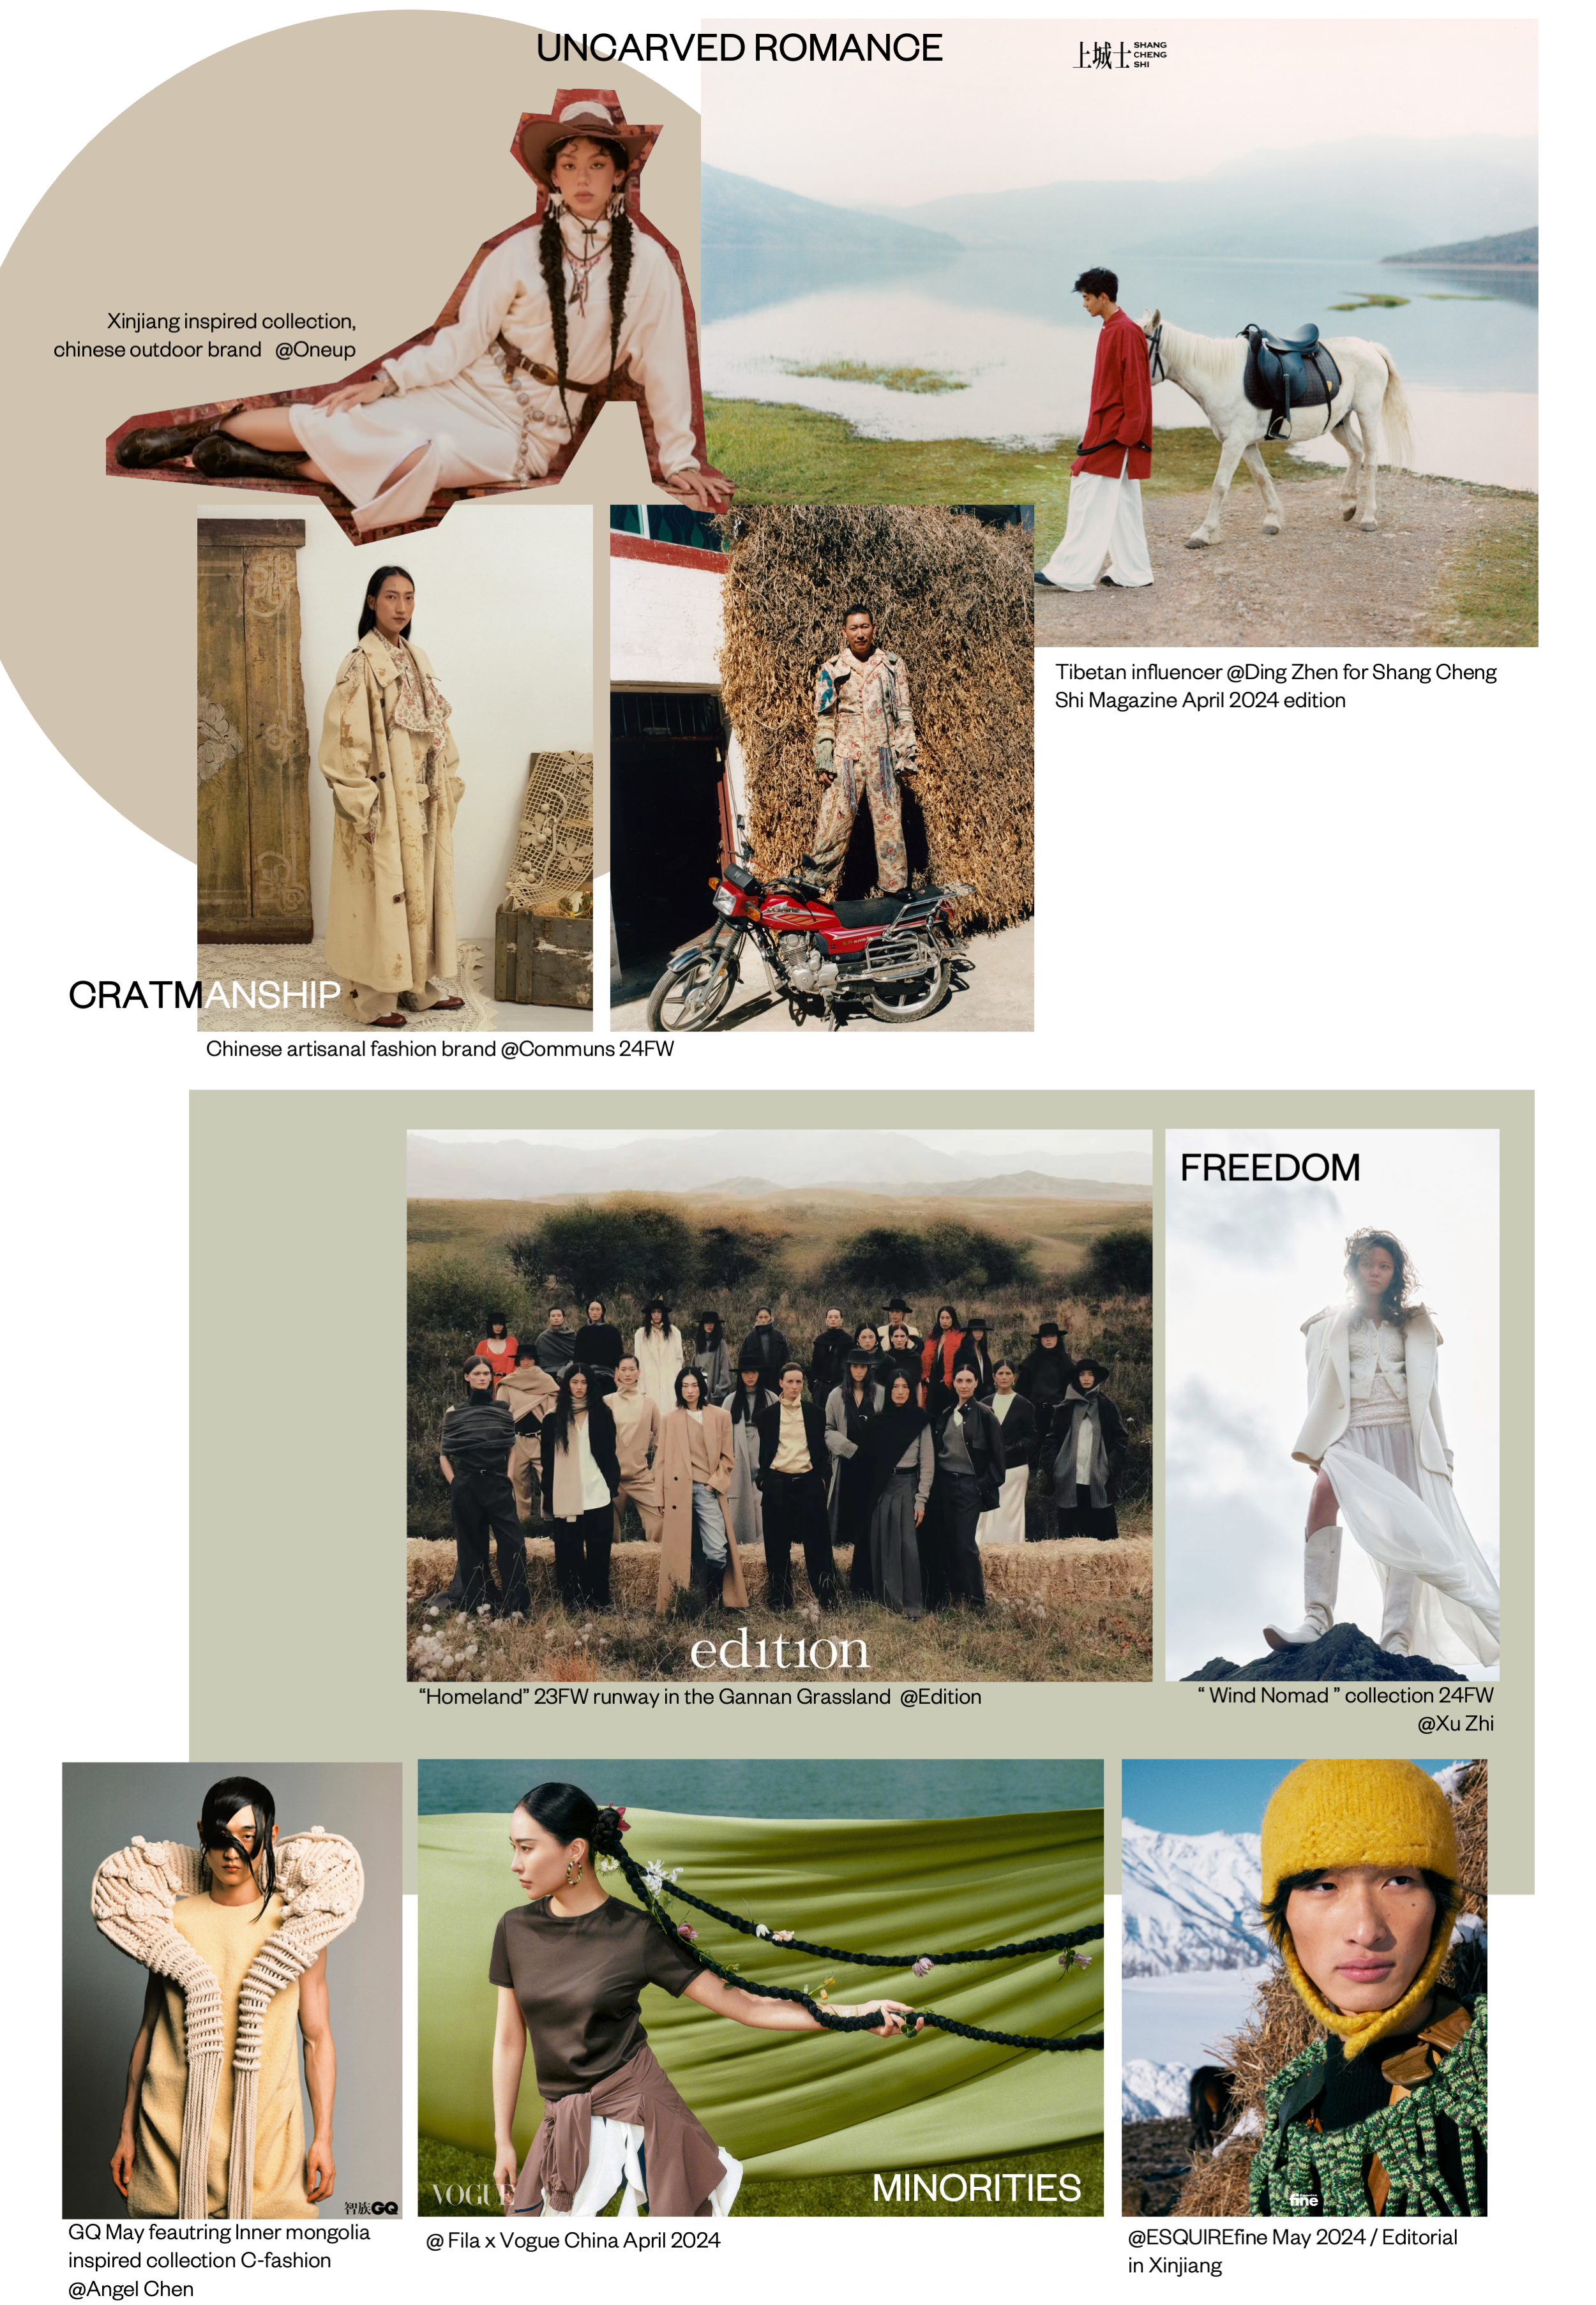 Moodboard created by The Chinese Pulse to visually explain China's 'Ethnic nomadism' style. Image: The Chinese Pulse